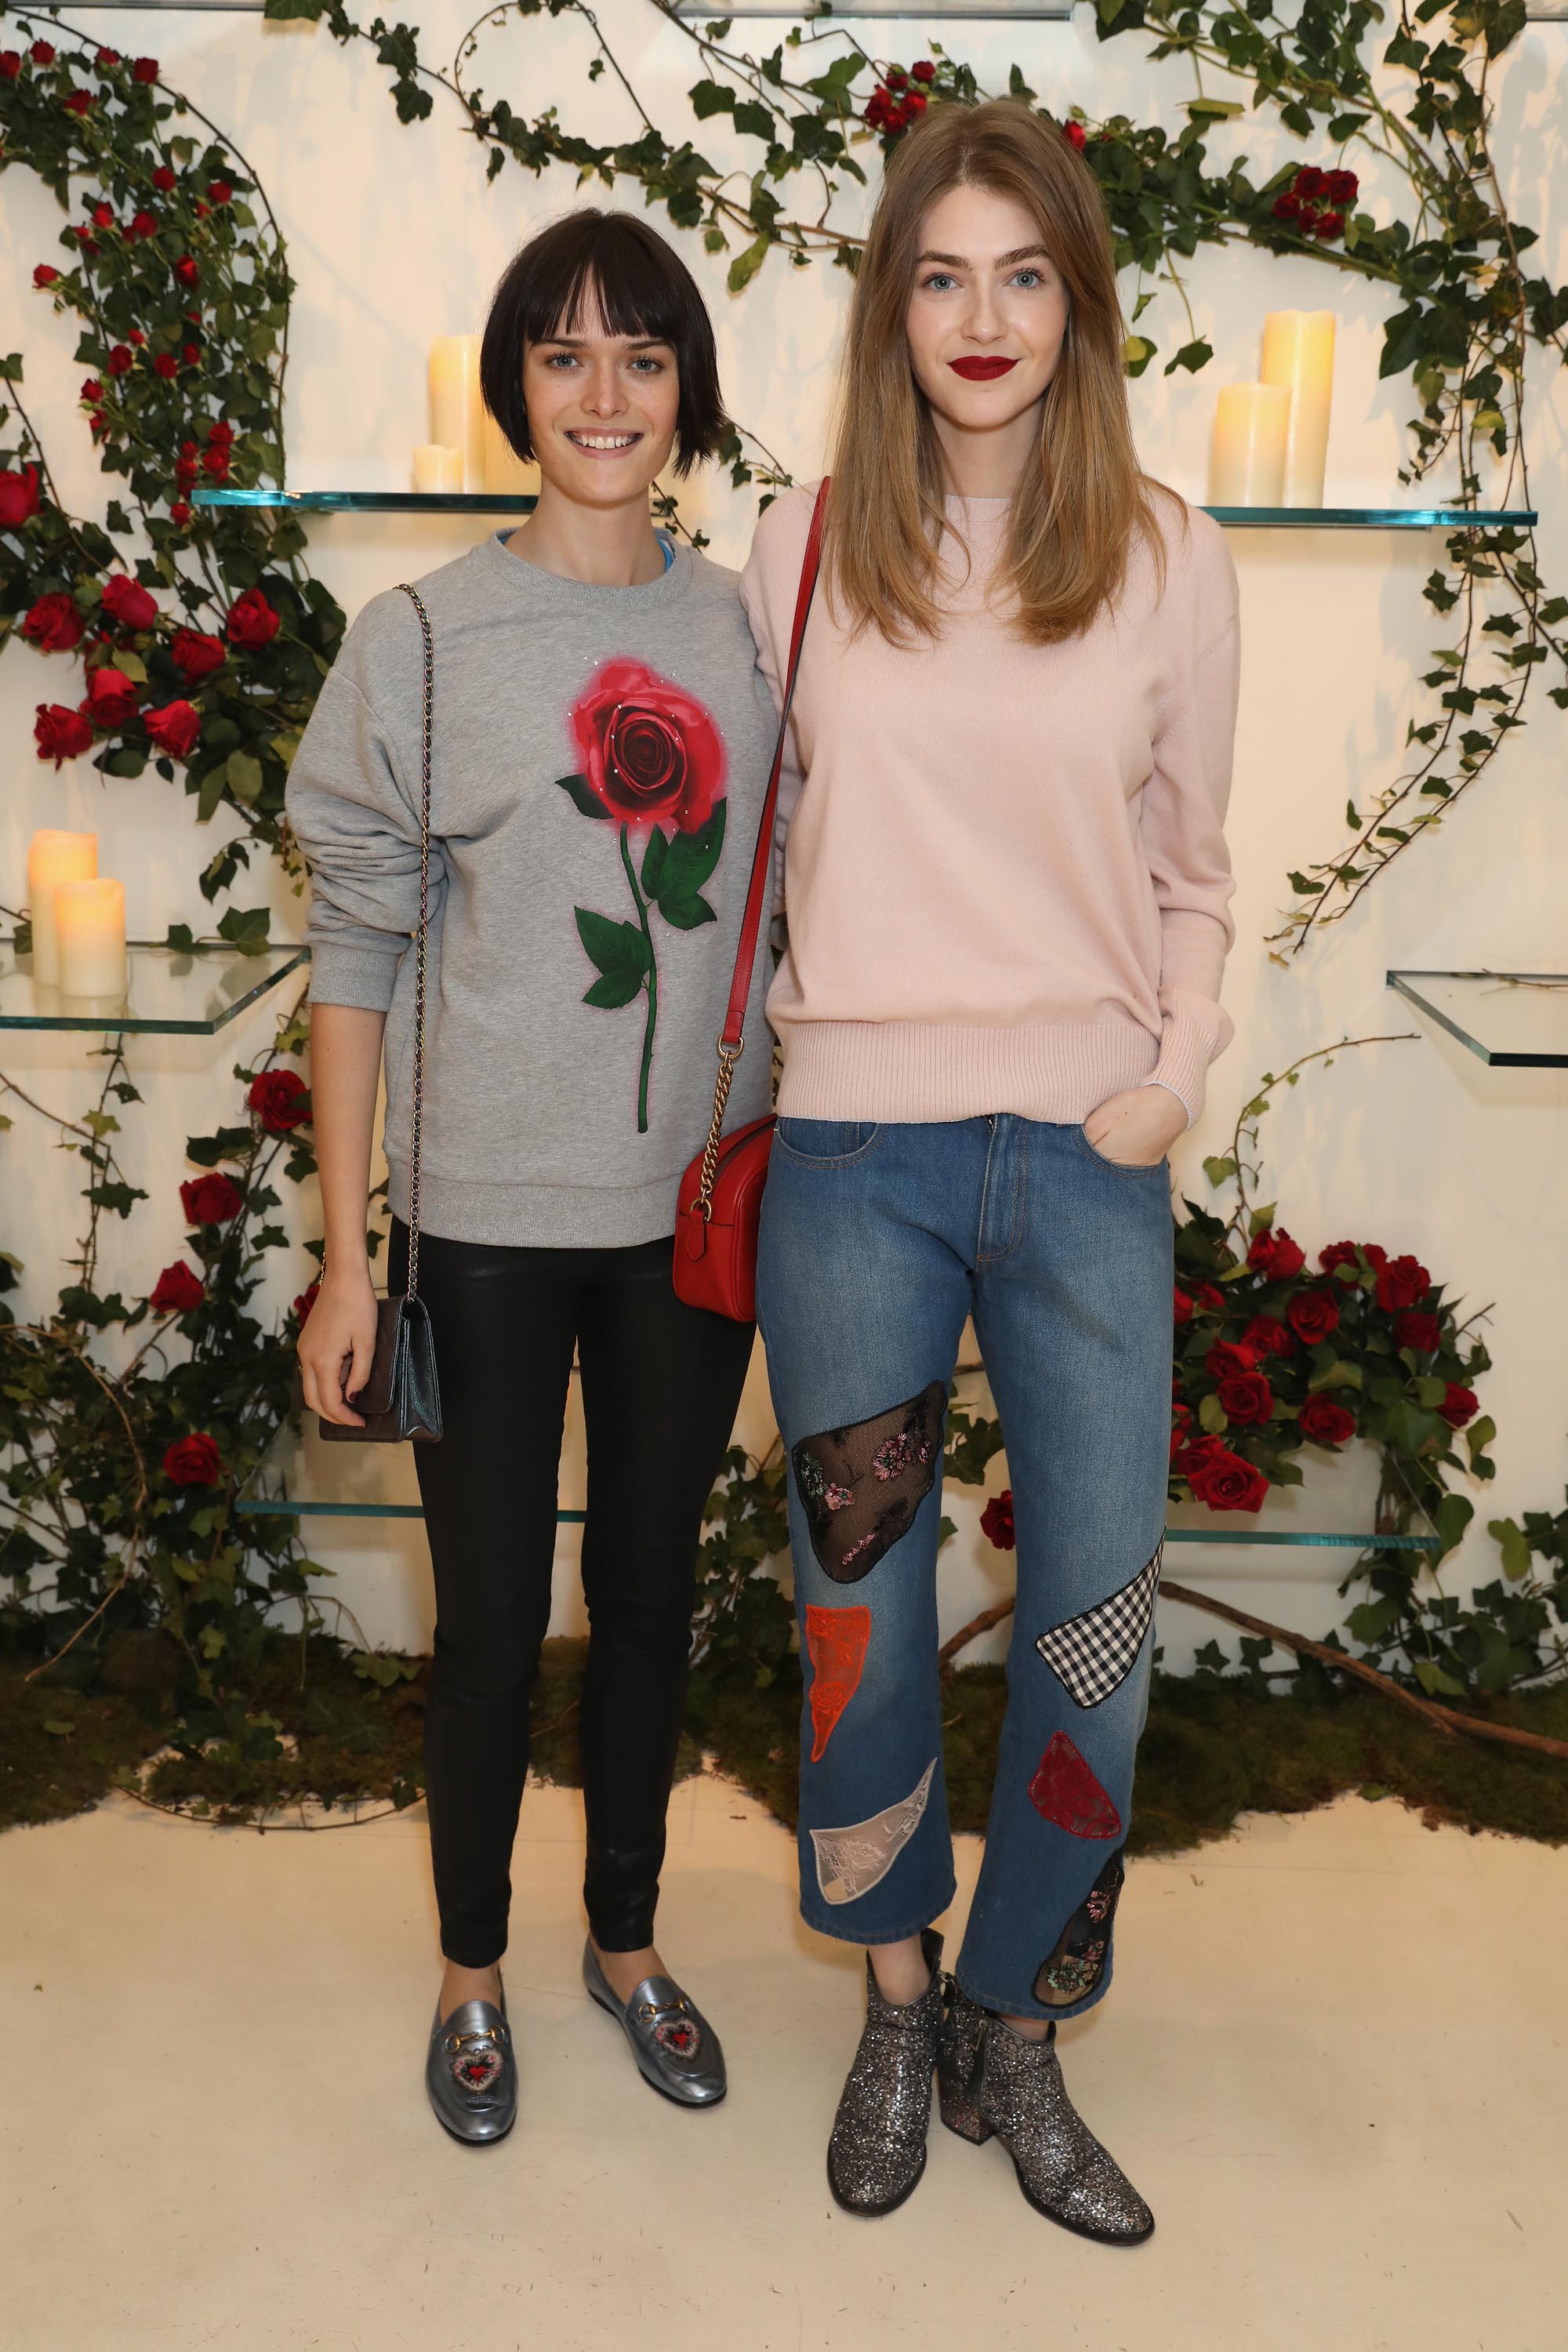 Sam Rollinson attends the launch of Christopher Kane’s new capsule collection